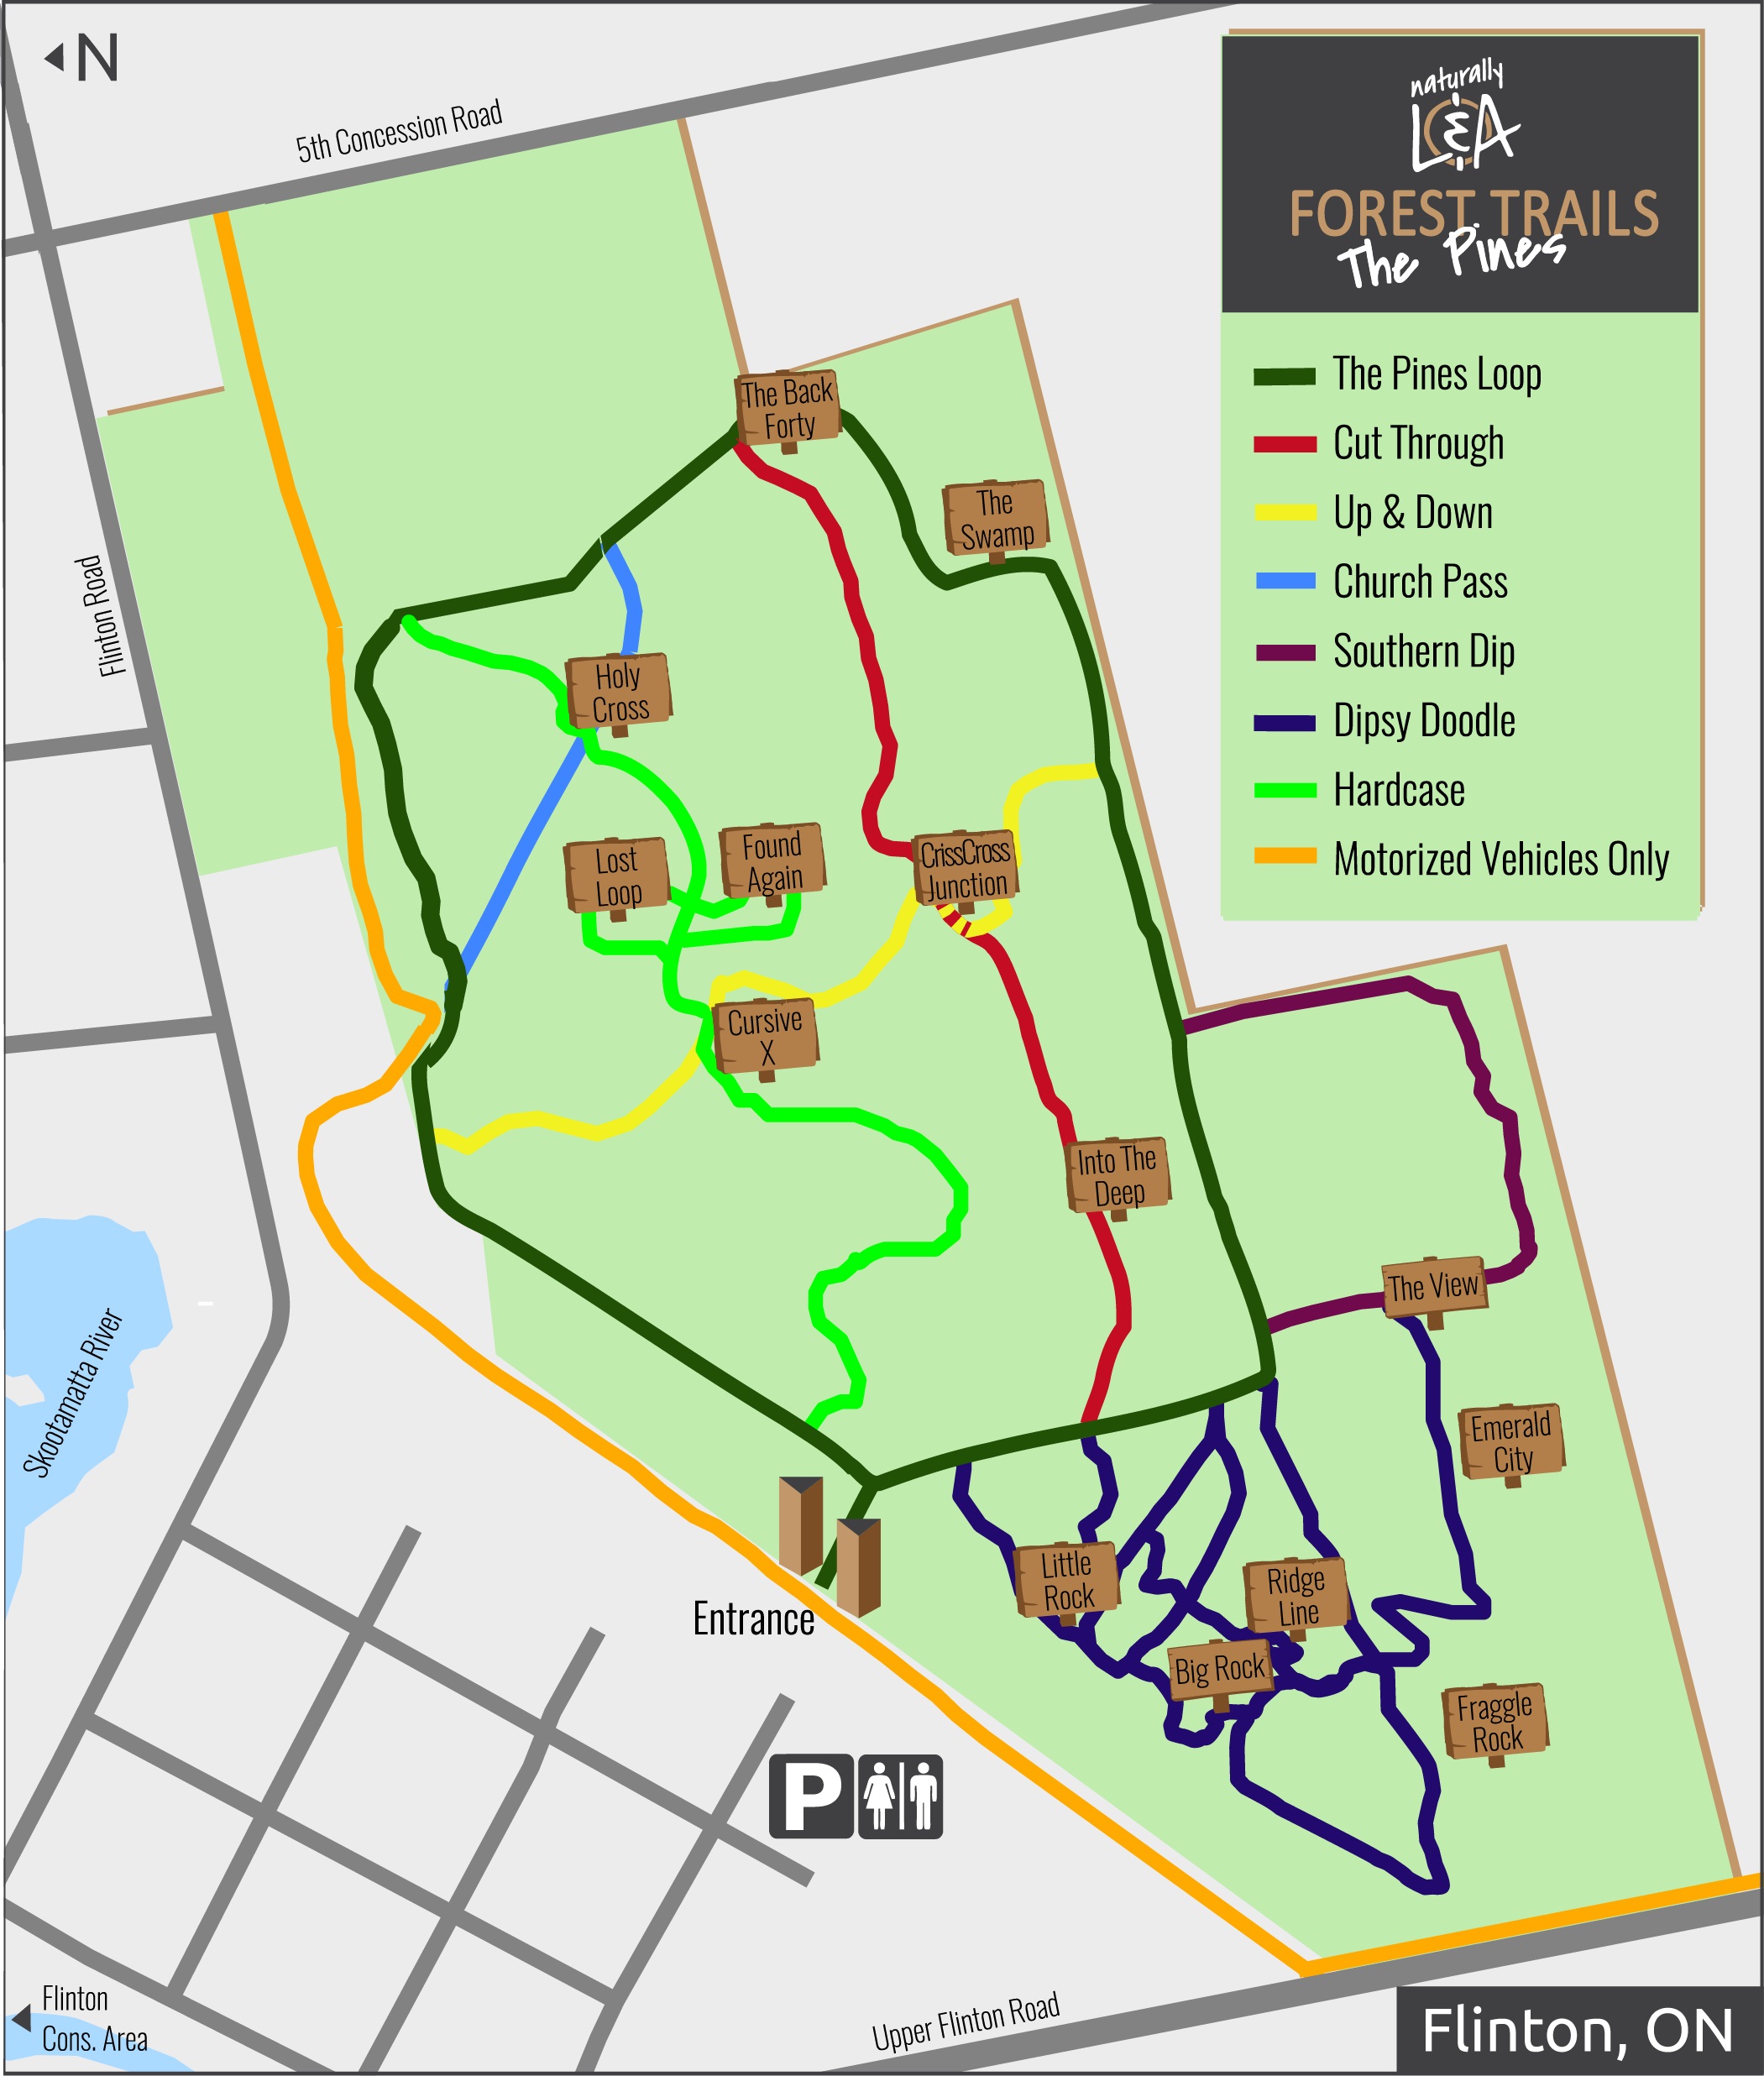 L&A Forest Trails Map - 2021.jpg